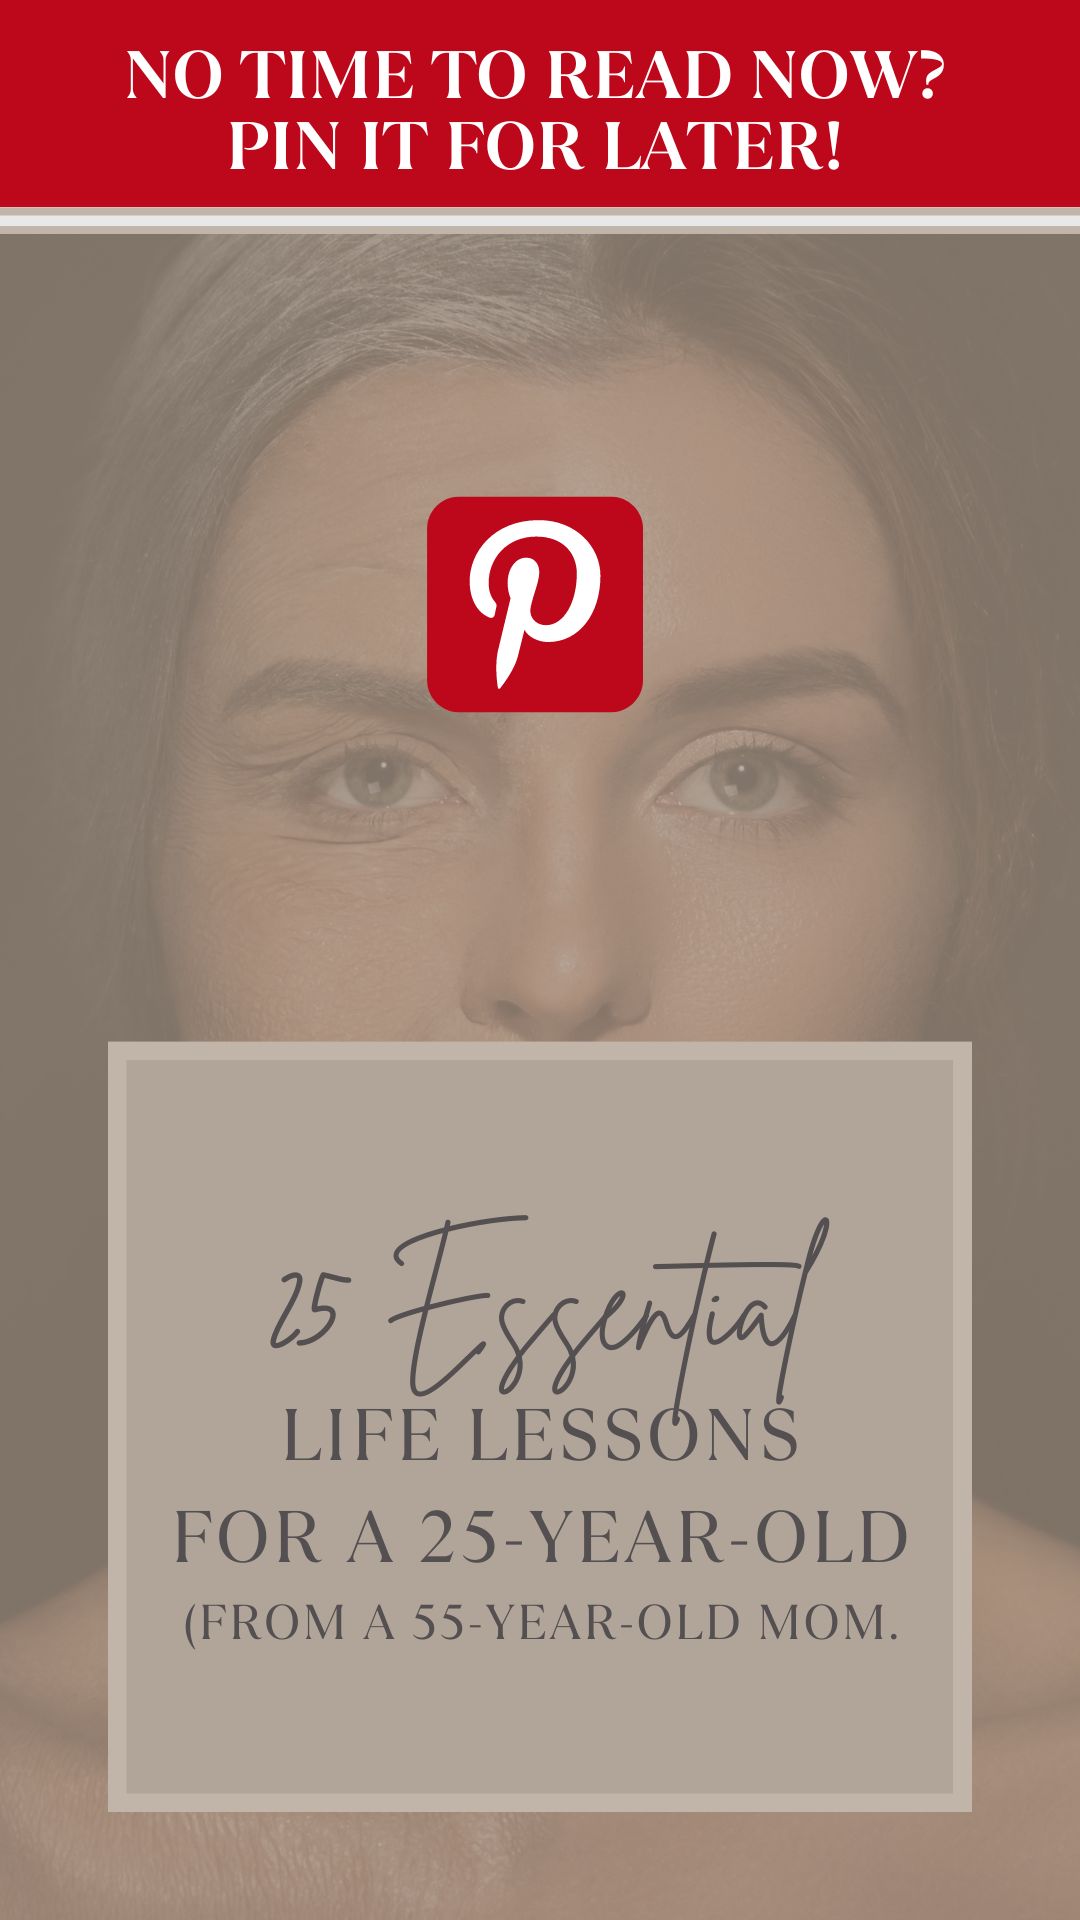 25 life lessons pin it